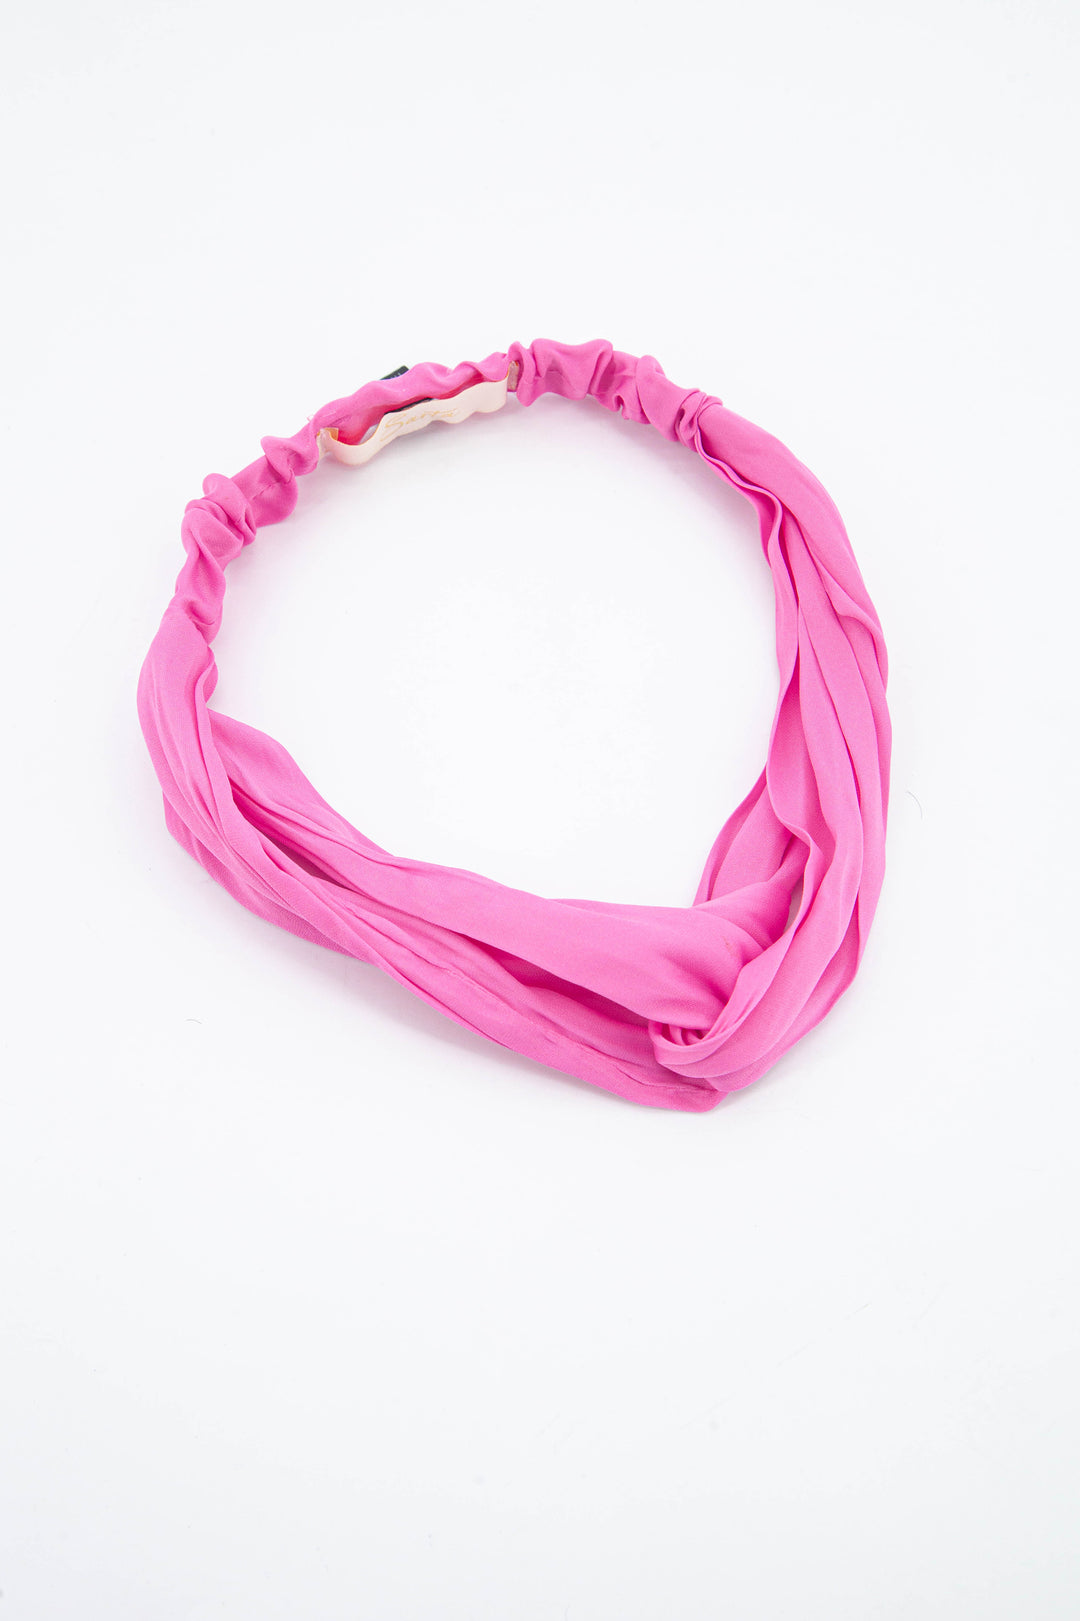 plain pink headband with an twist at the front